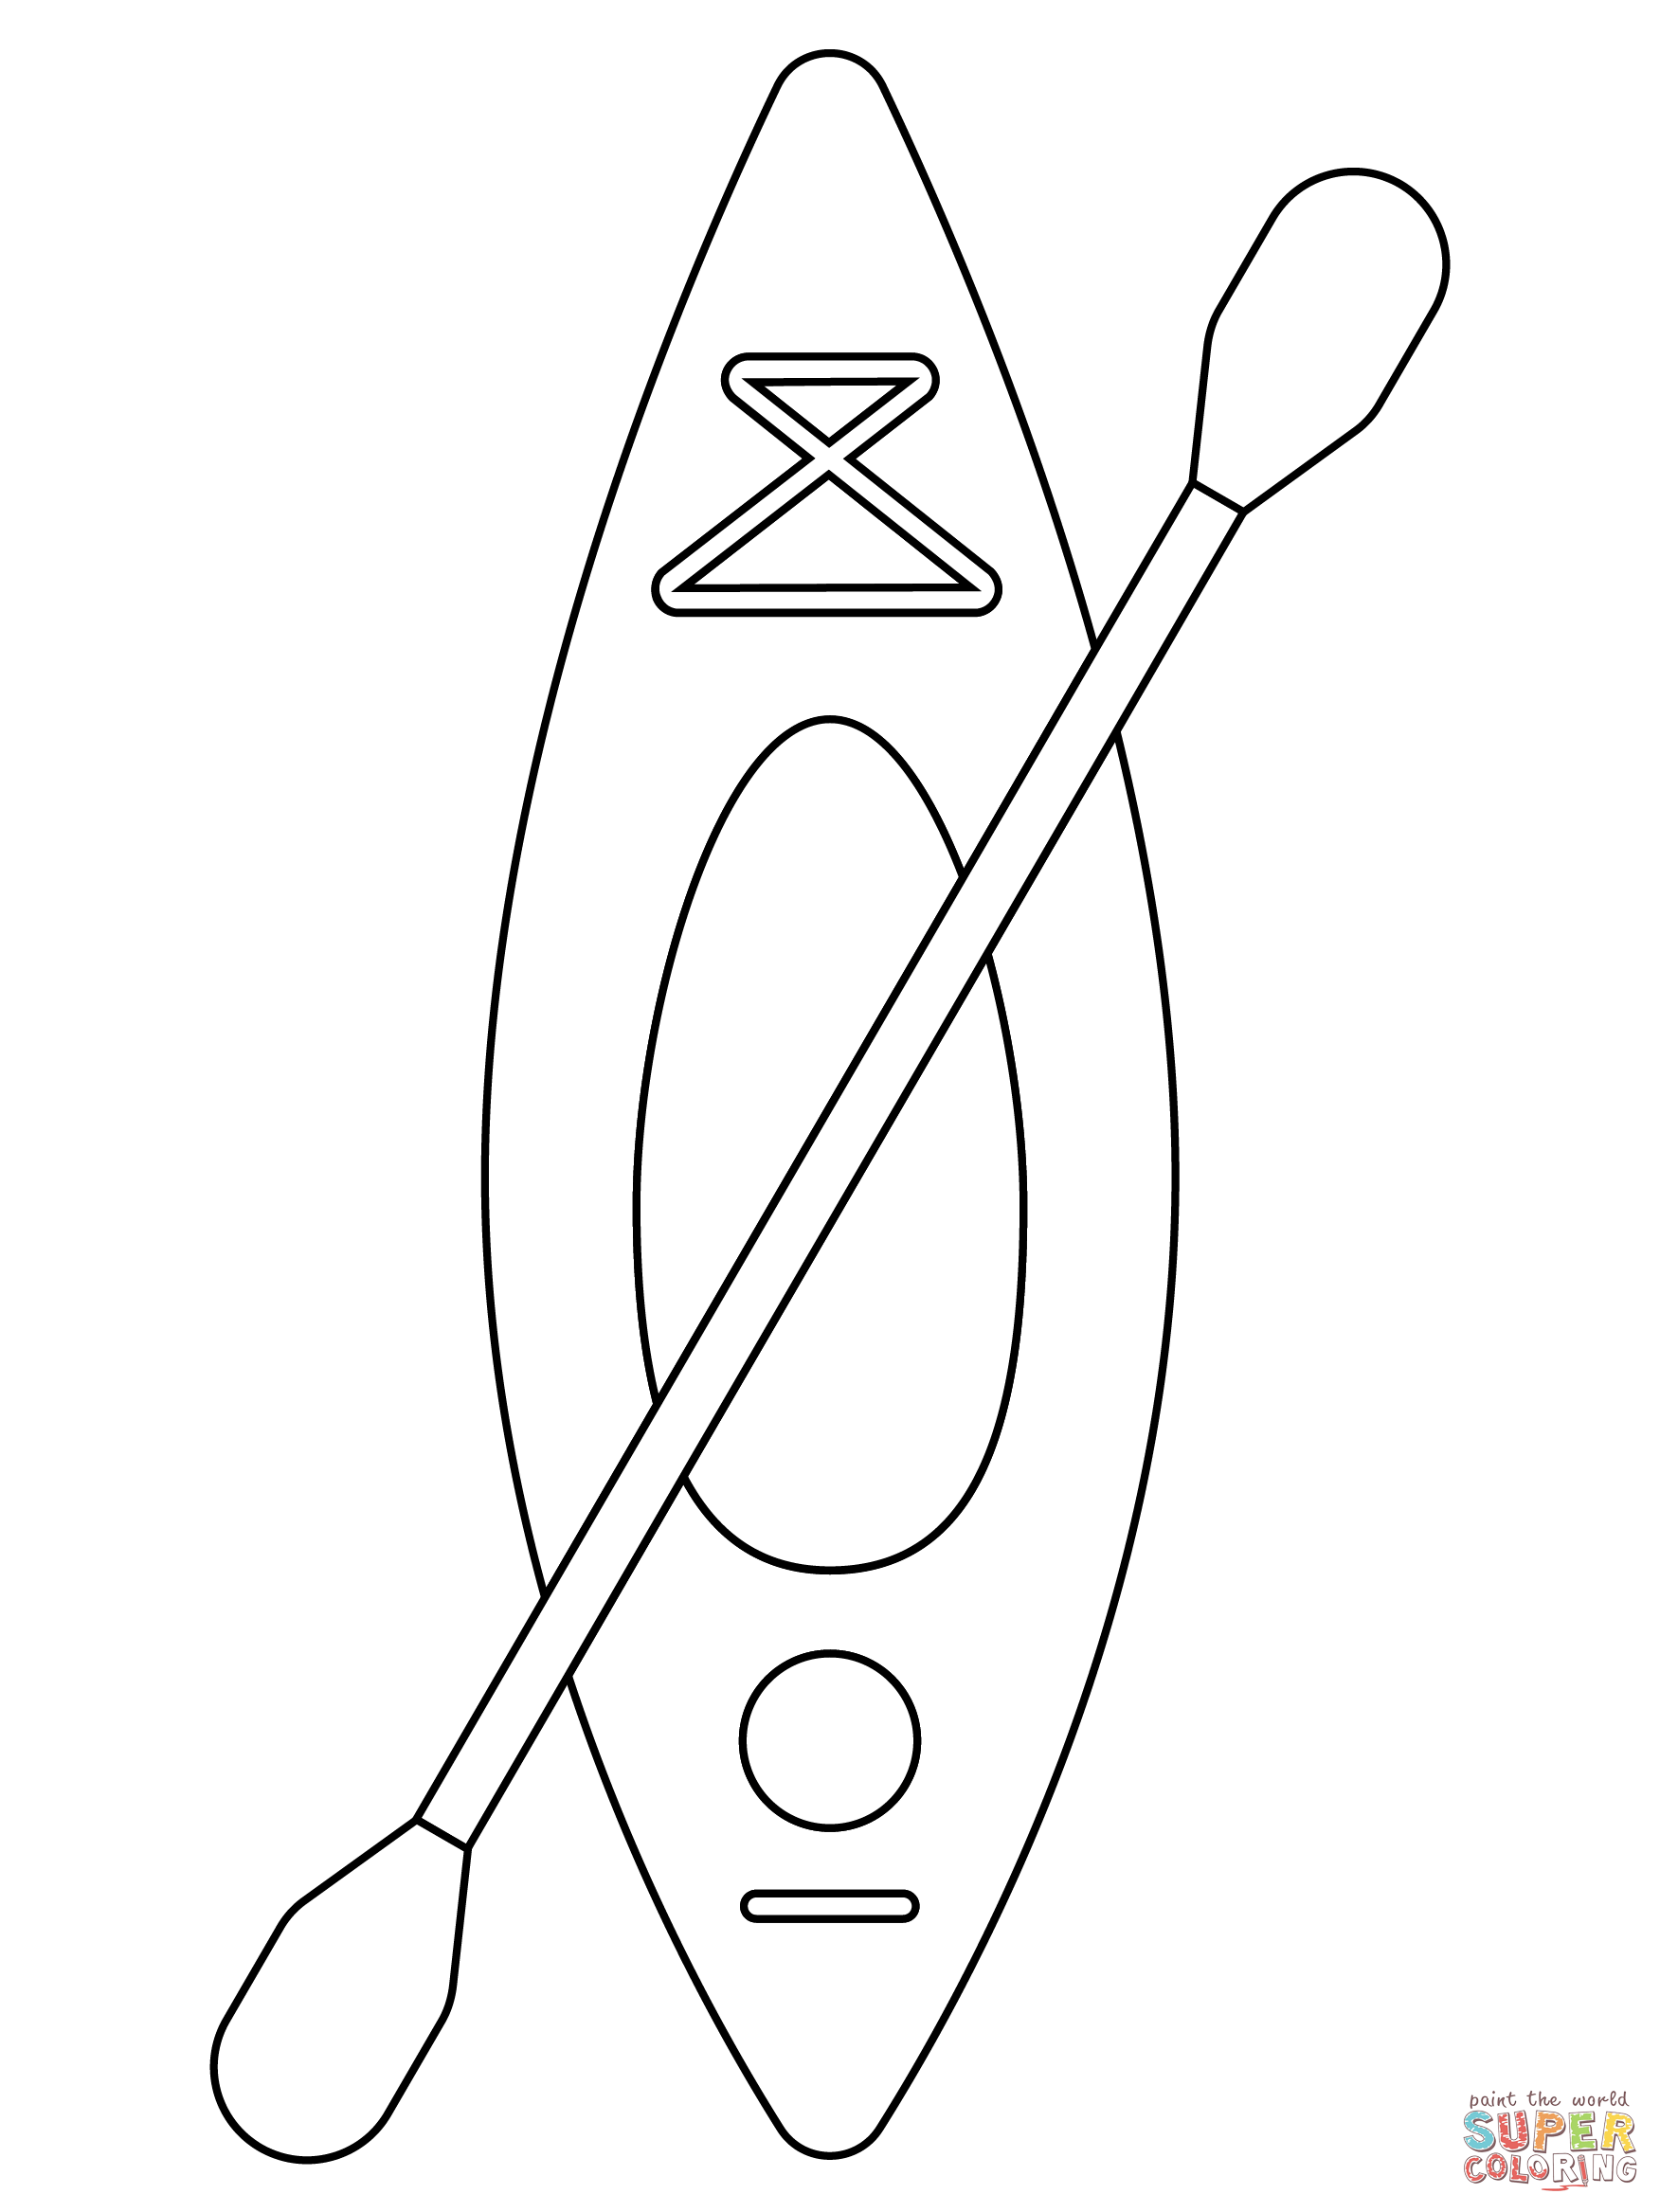 Kayak coloring page free printable coloring pages